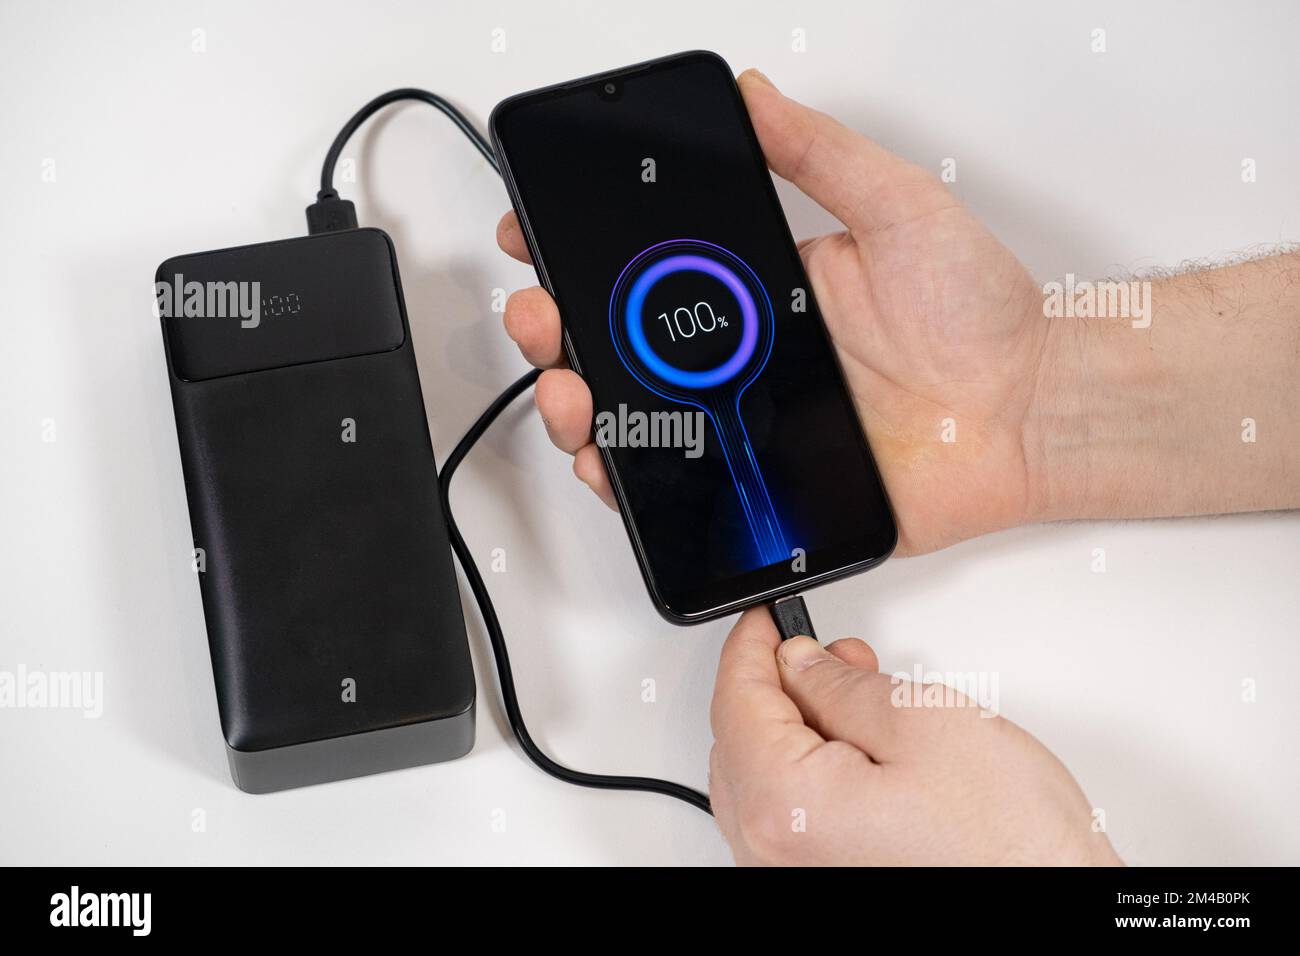 Connecting a mobile phone to a power bank. Charging gadgets from power banks. Stock Photo